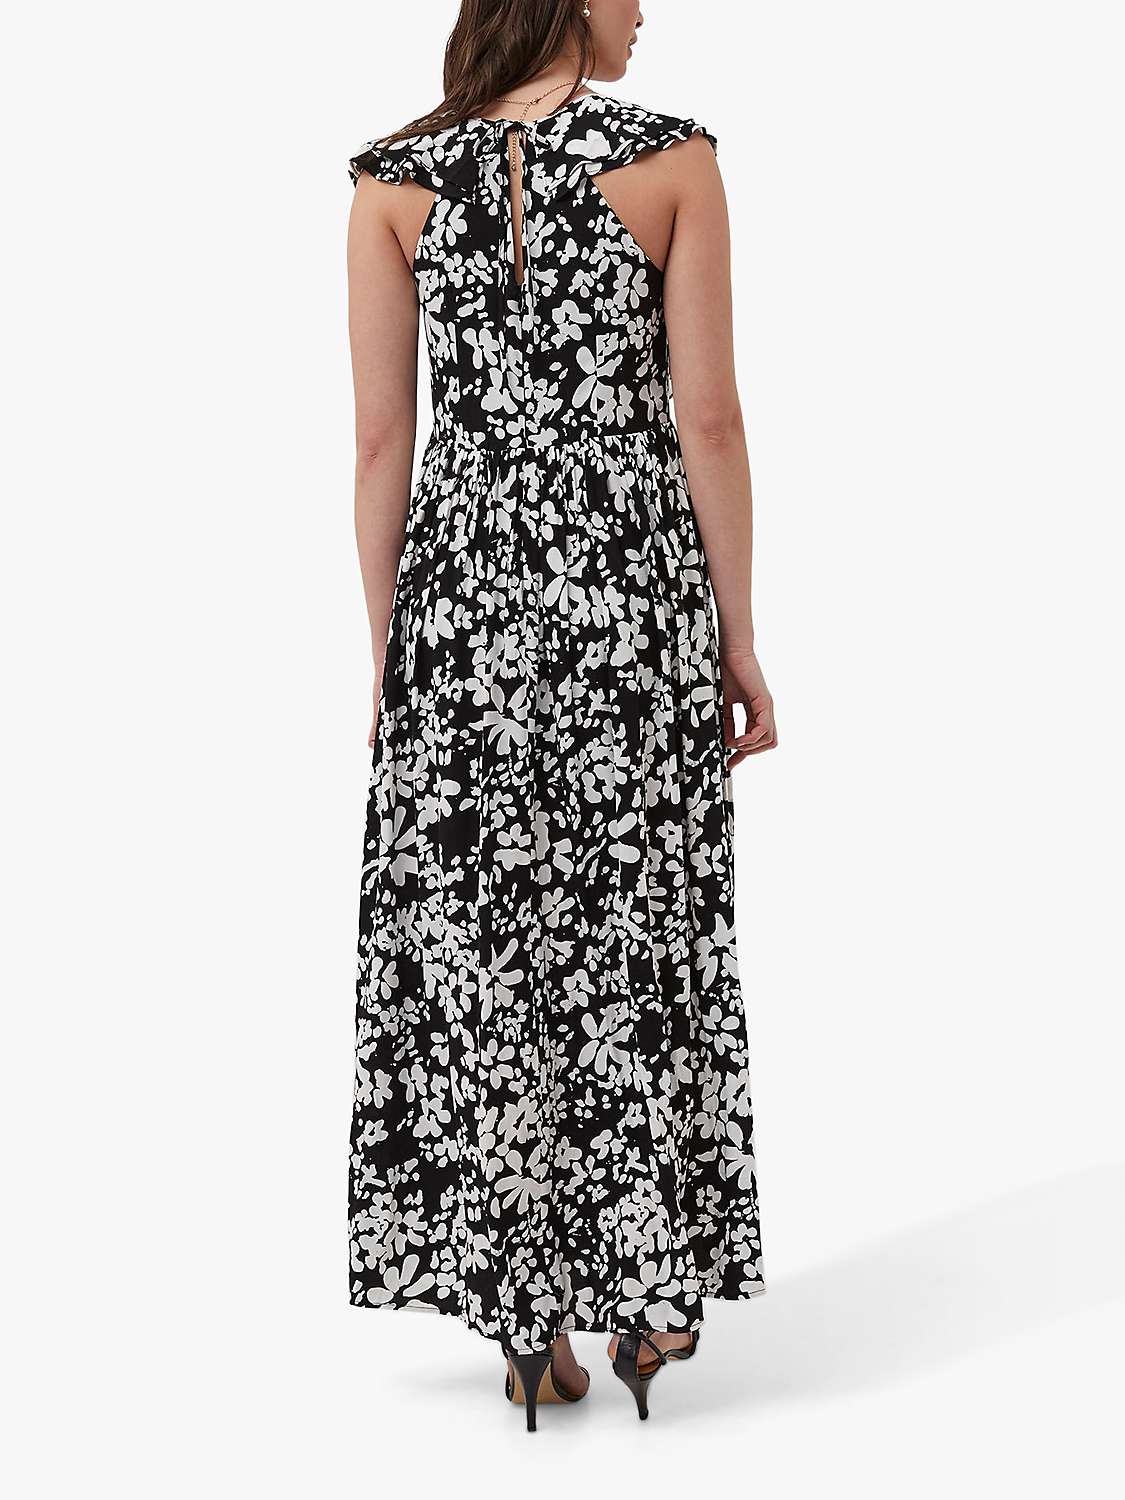 Buy French Connection Floral Drape Strappy Dress, Black/Summer White Online at johnlewis.com